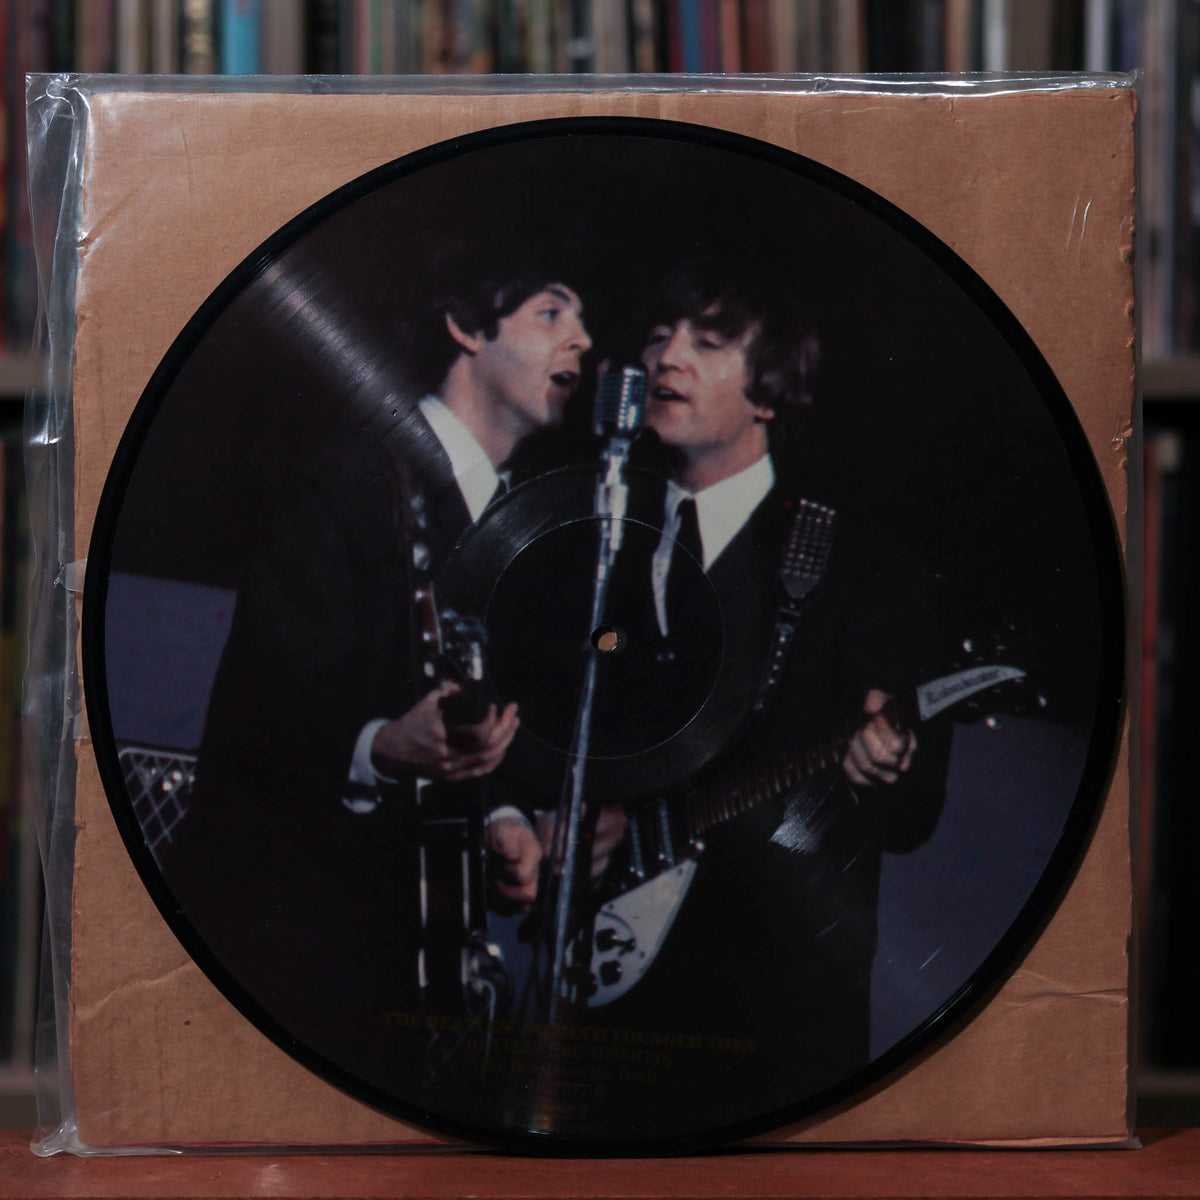 The Beatles - So Much Younger Then - Picture Disc - 1980's Democrat Records